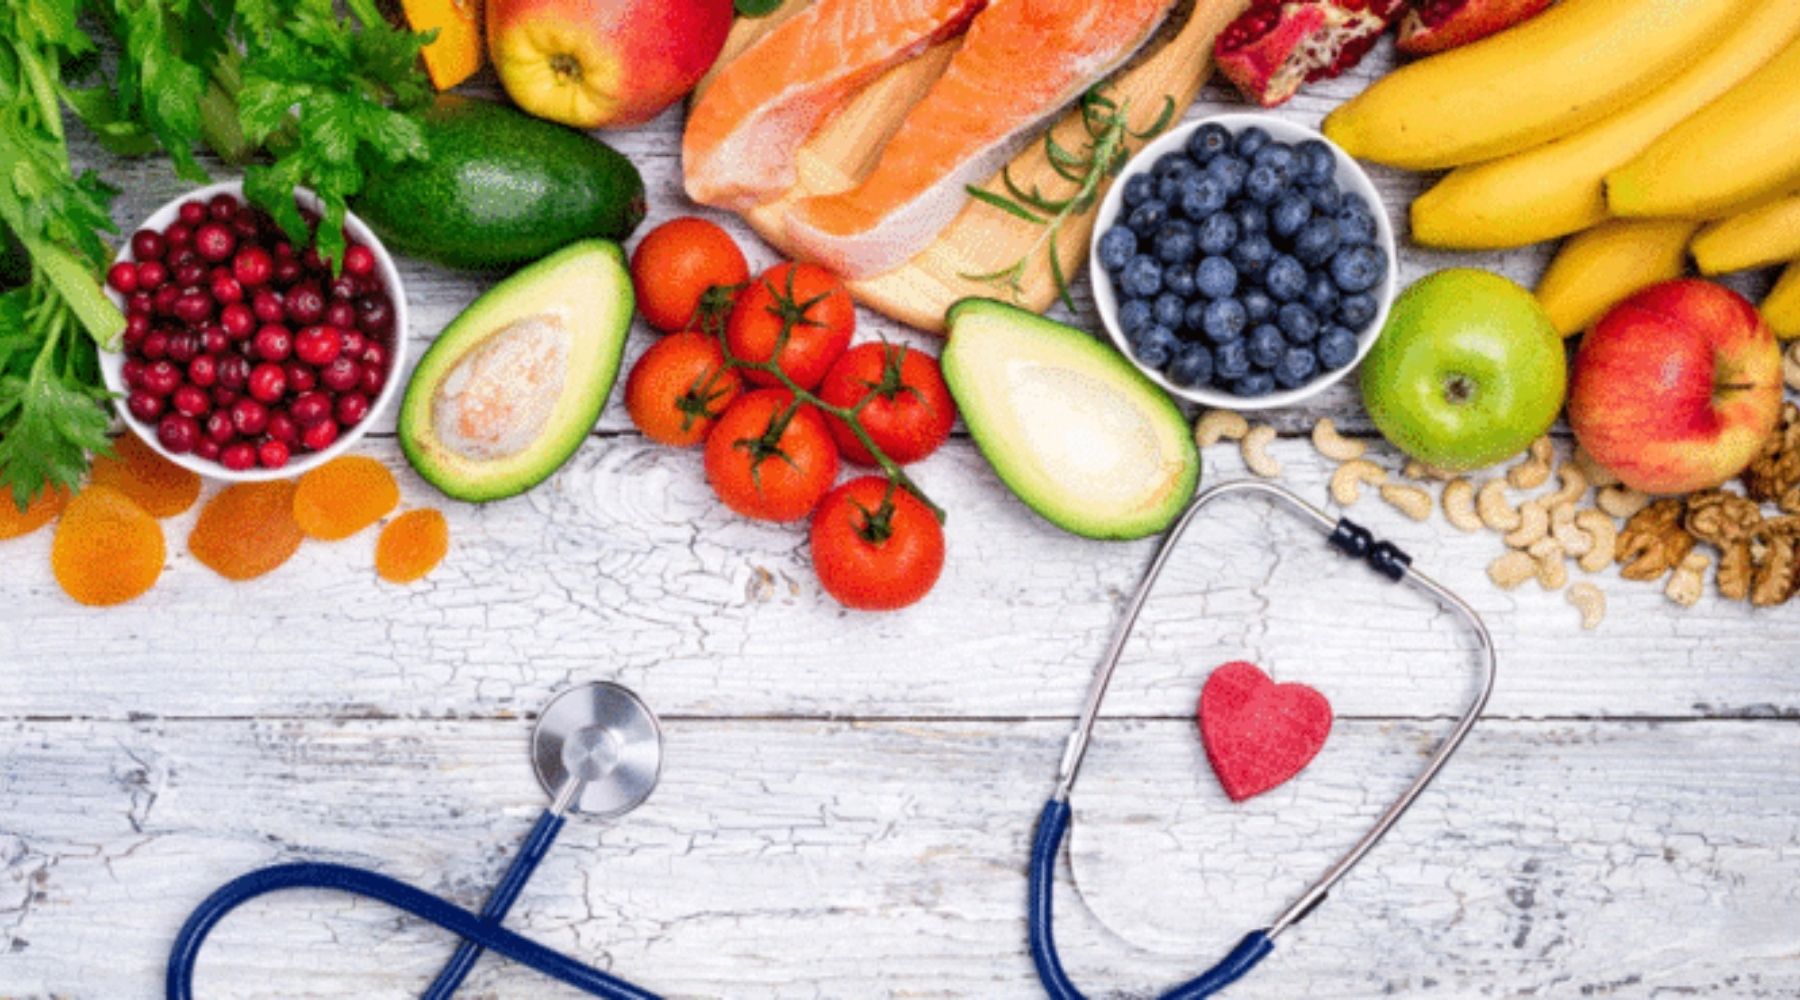 Can Your Diet Lower Your Risk of Cancer Recurrence?